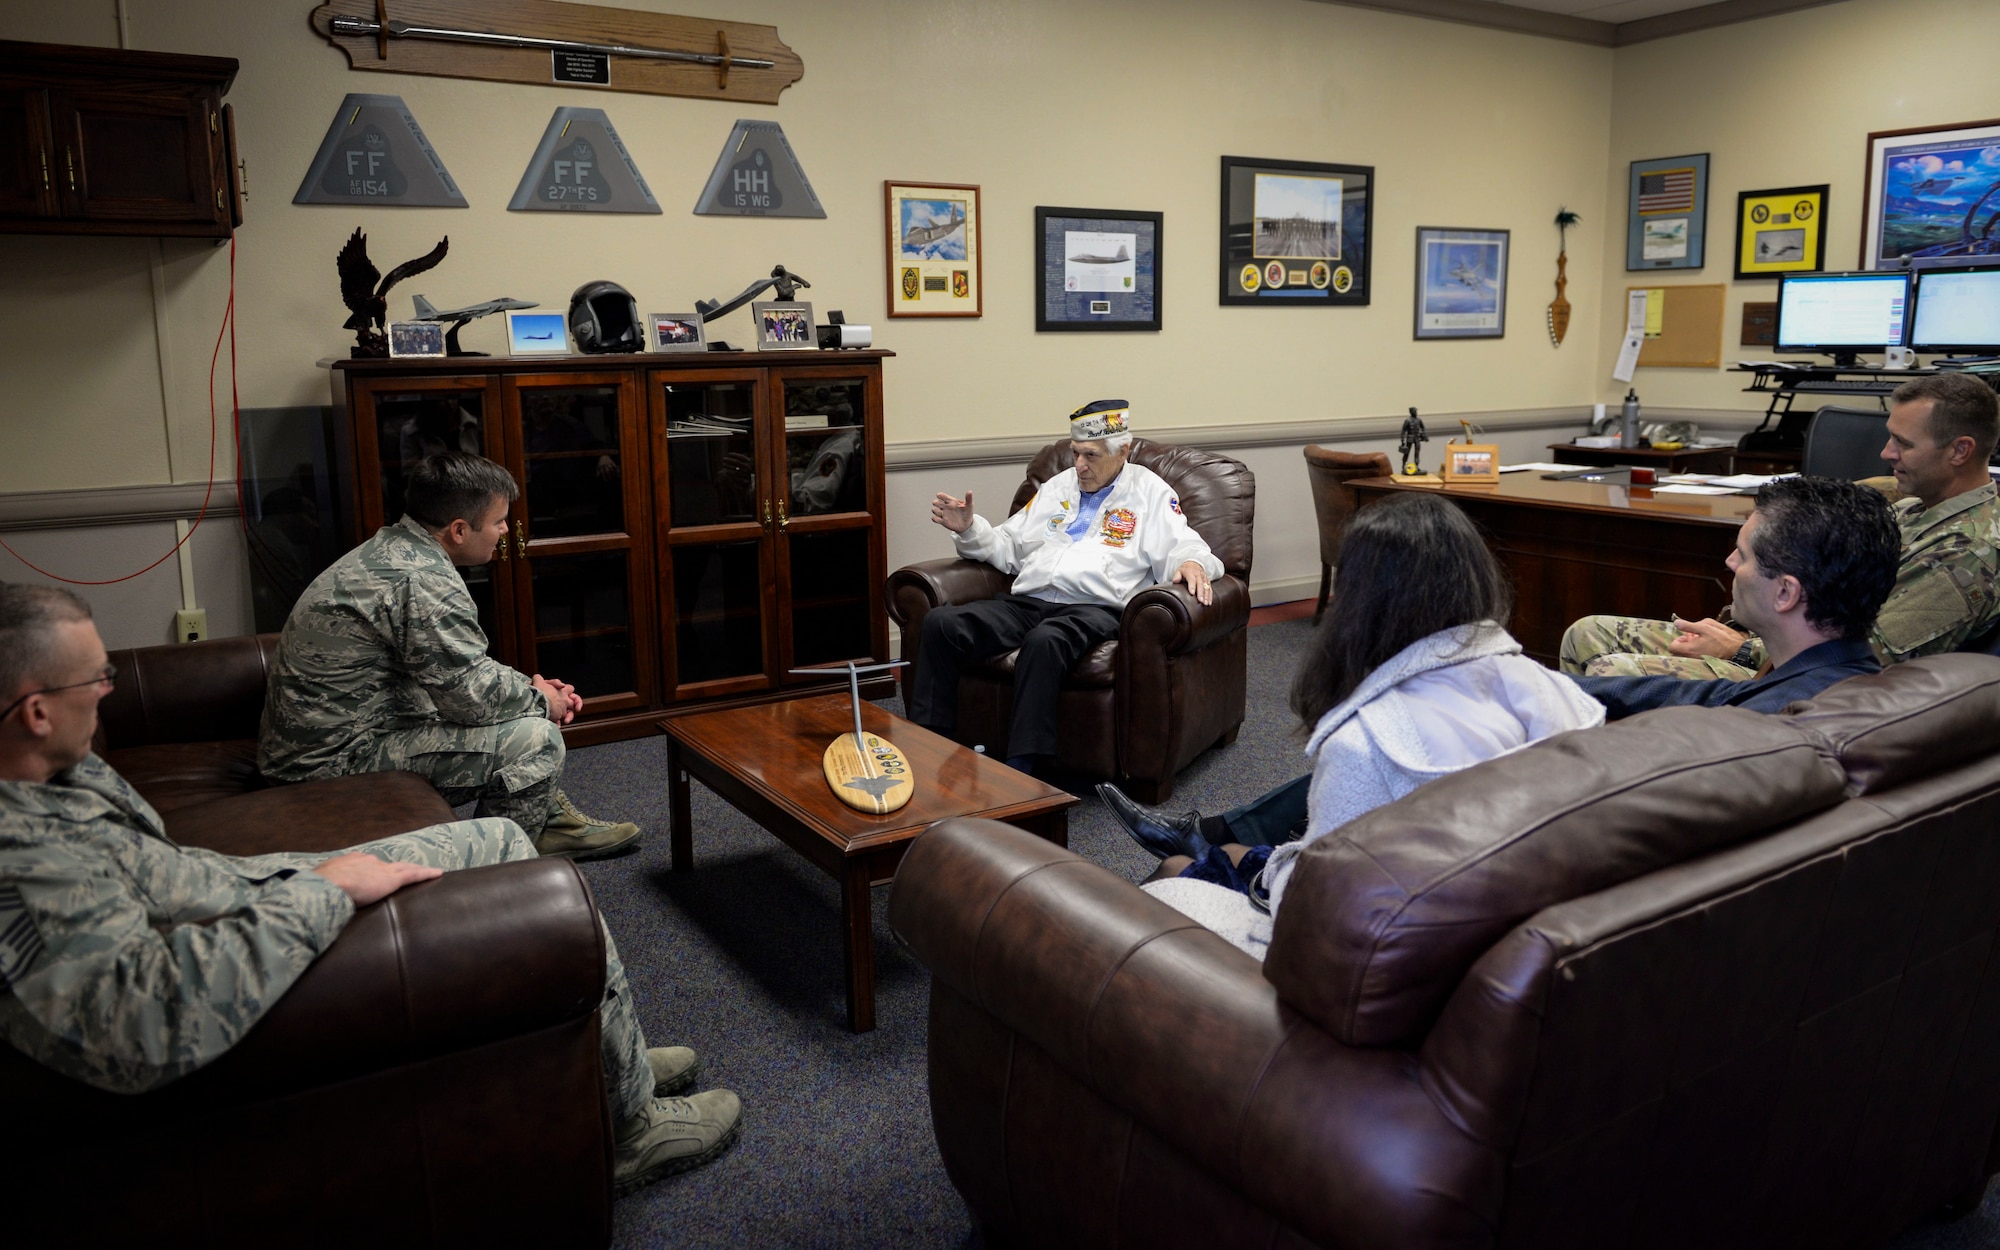 Ed Hall, Pearl Harbor Survivor, recalls his Pearl Harbor attacks experience with 99th Air Base Wing leadership Dec. 7, 2018 at Nellis Air Force Base, Nevada. Hall spent National Pearl Harbor Remembrance Day touring Nellis and visiting Airmen. (U.S. Air Force photo by Airman 1st Class Bailee A. Darbasie)